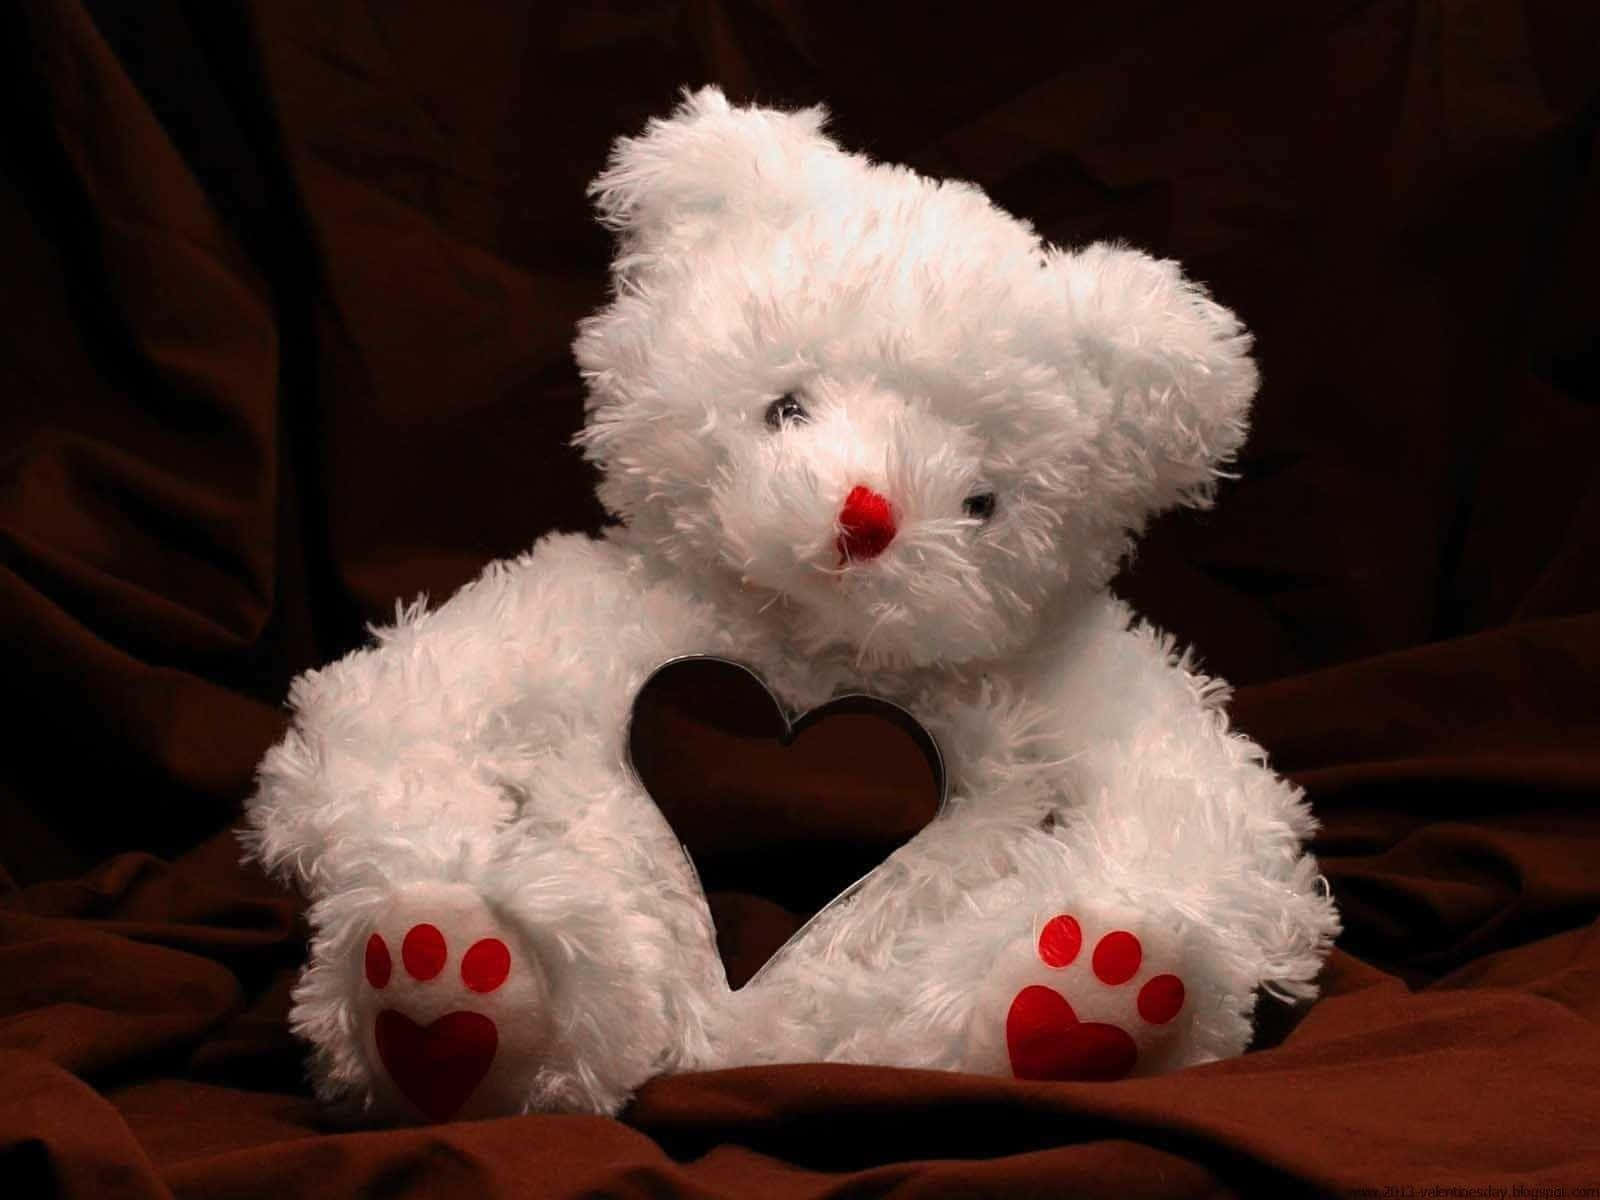 A White Teddy Bear With Red Paws